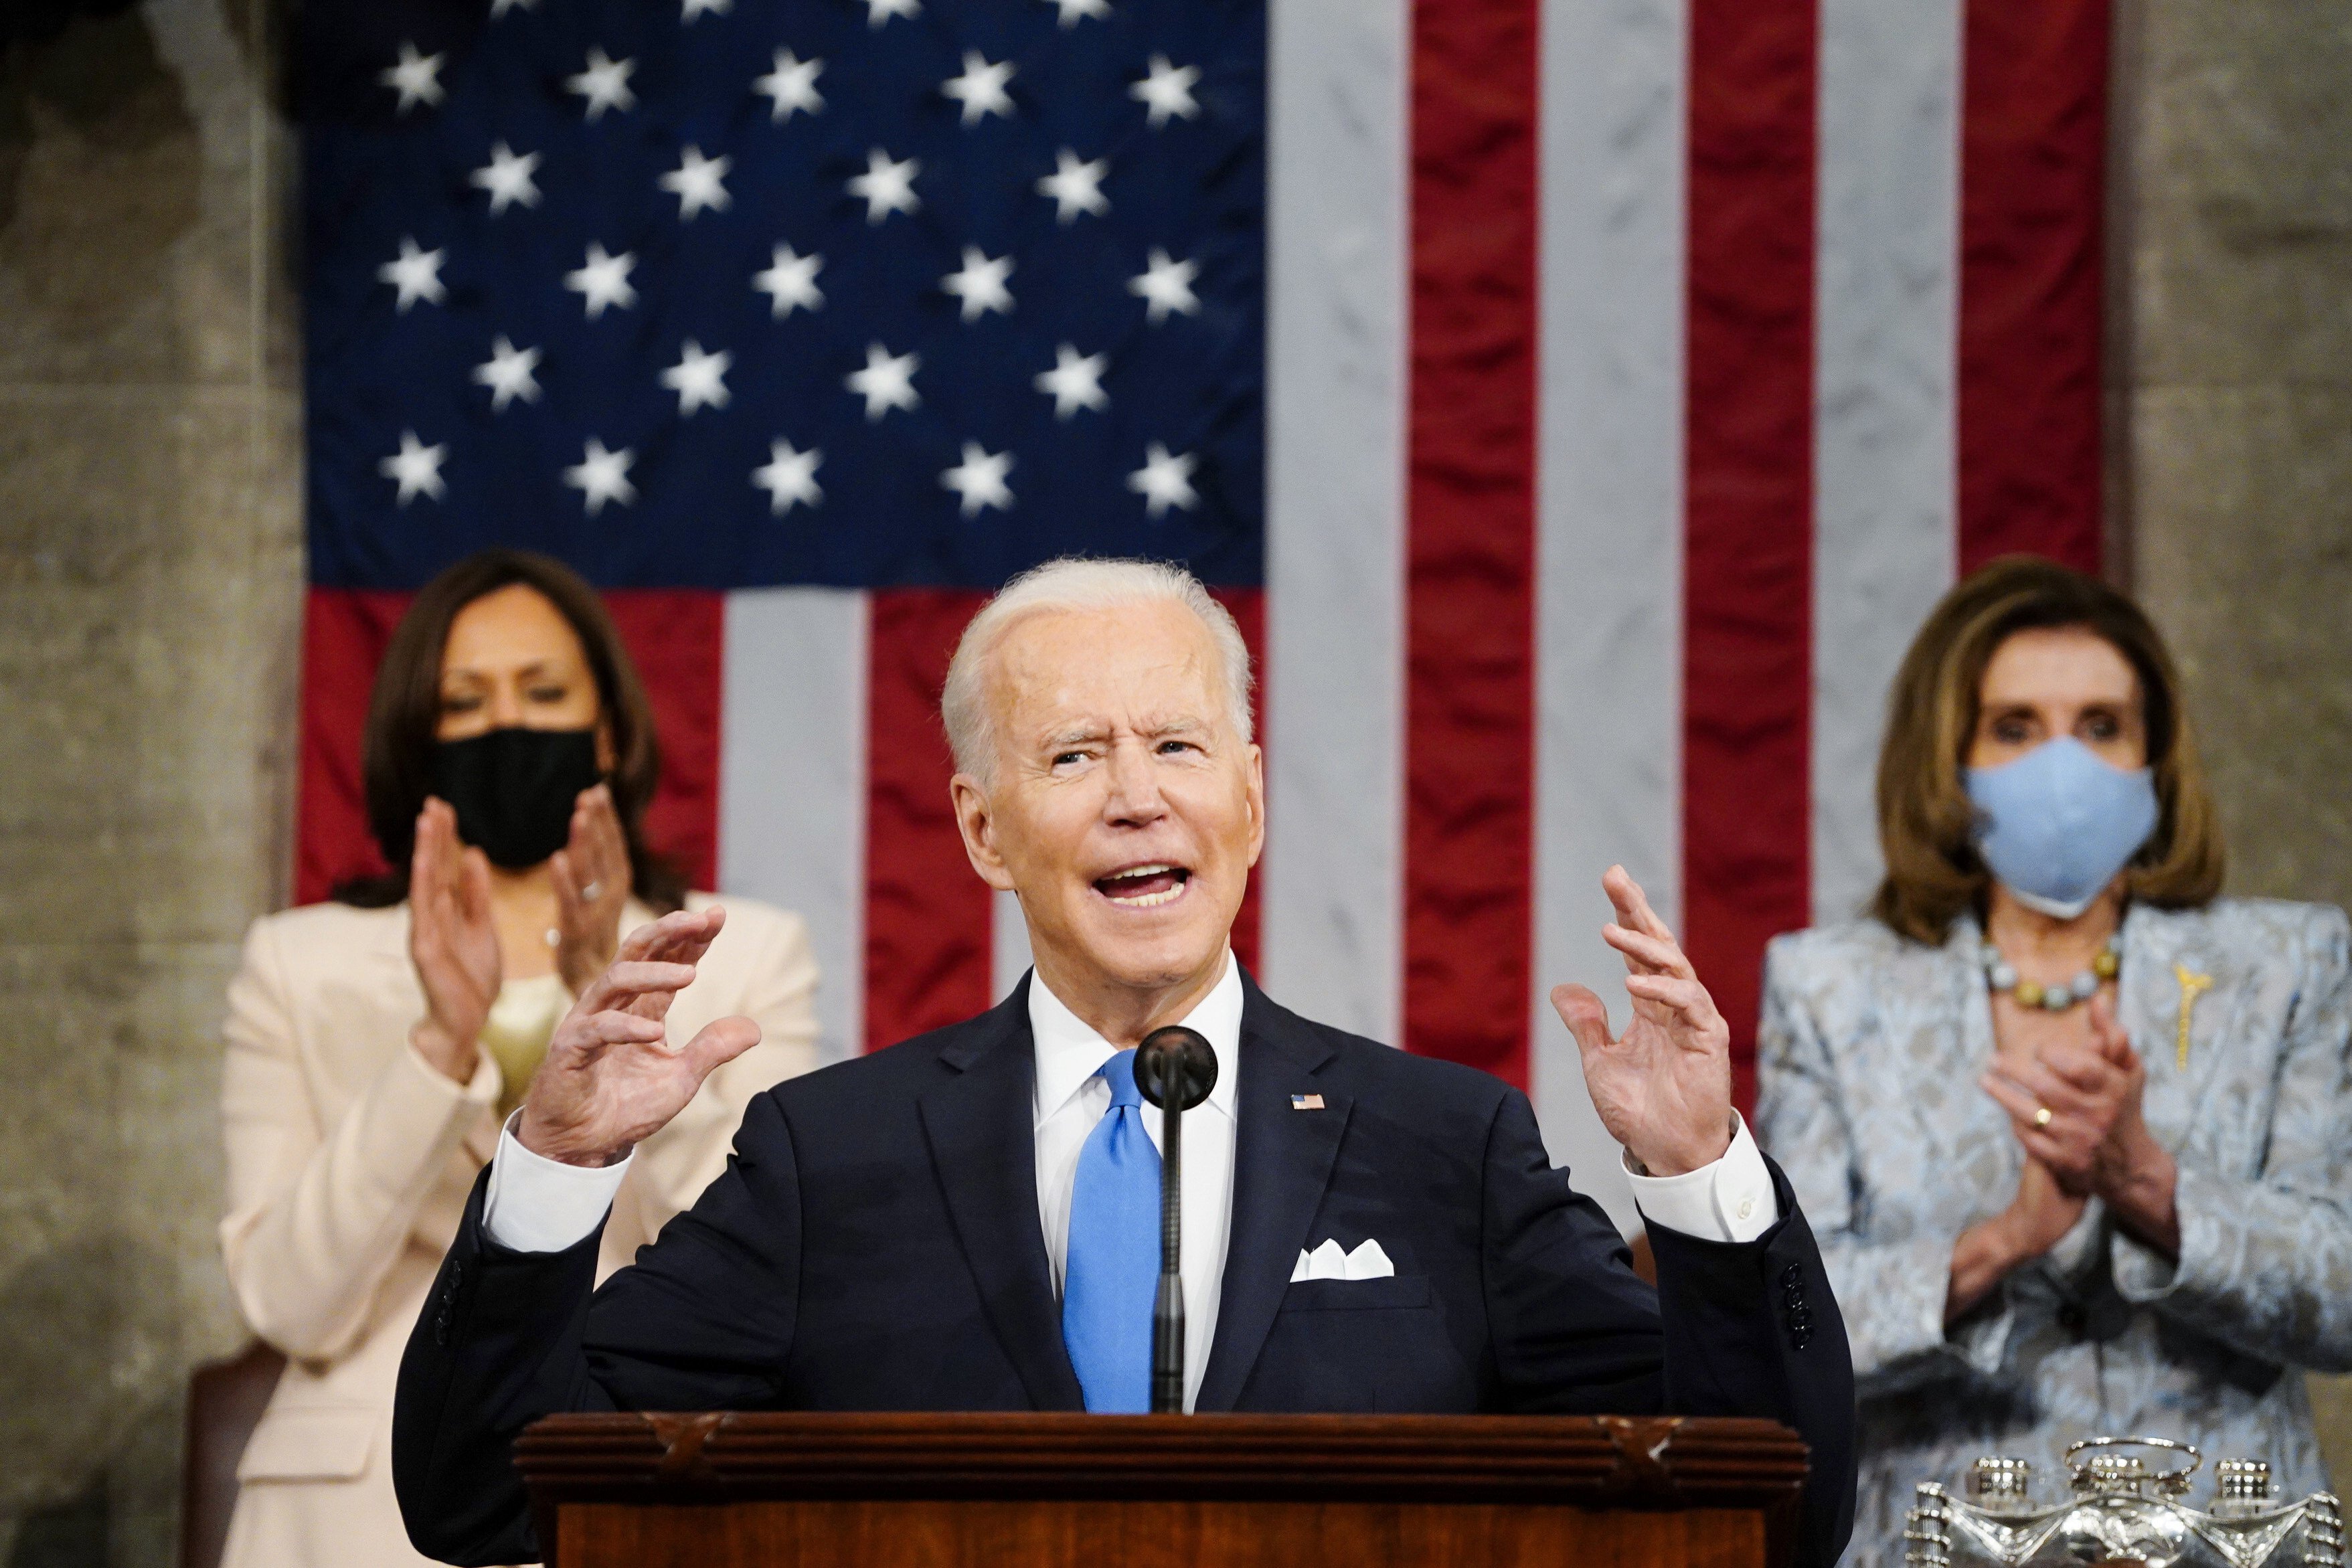 US President Joe Biden addresses a joint session of Congress in the House Chamber at the US Capitol on April 28, 2021. Biden faces one of his toughest challenges yet as president as he tries to foster healing and unity in a bitterly divided country. Photo: AP